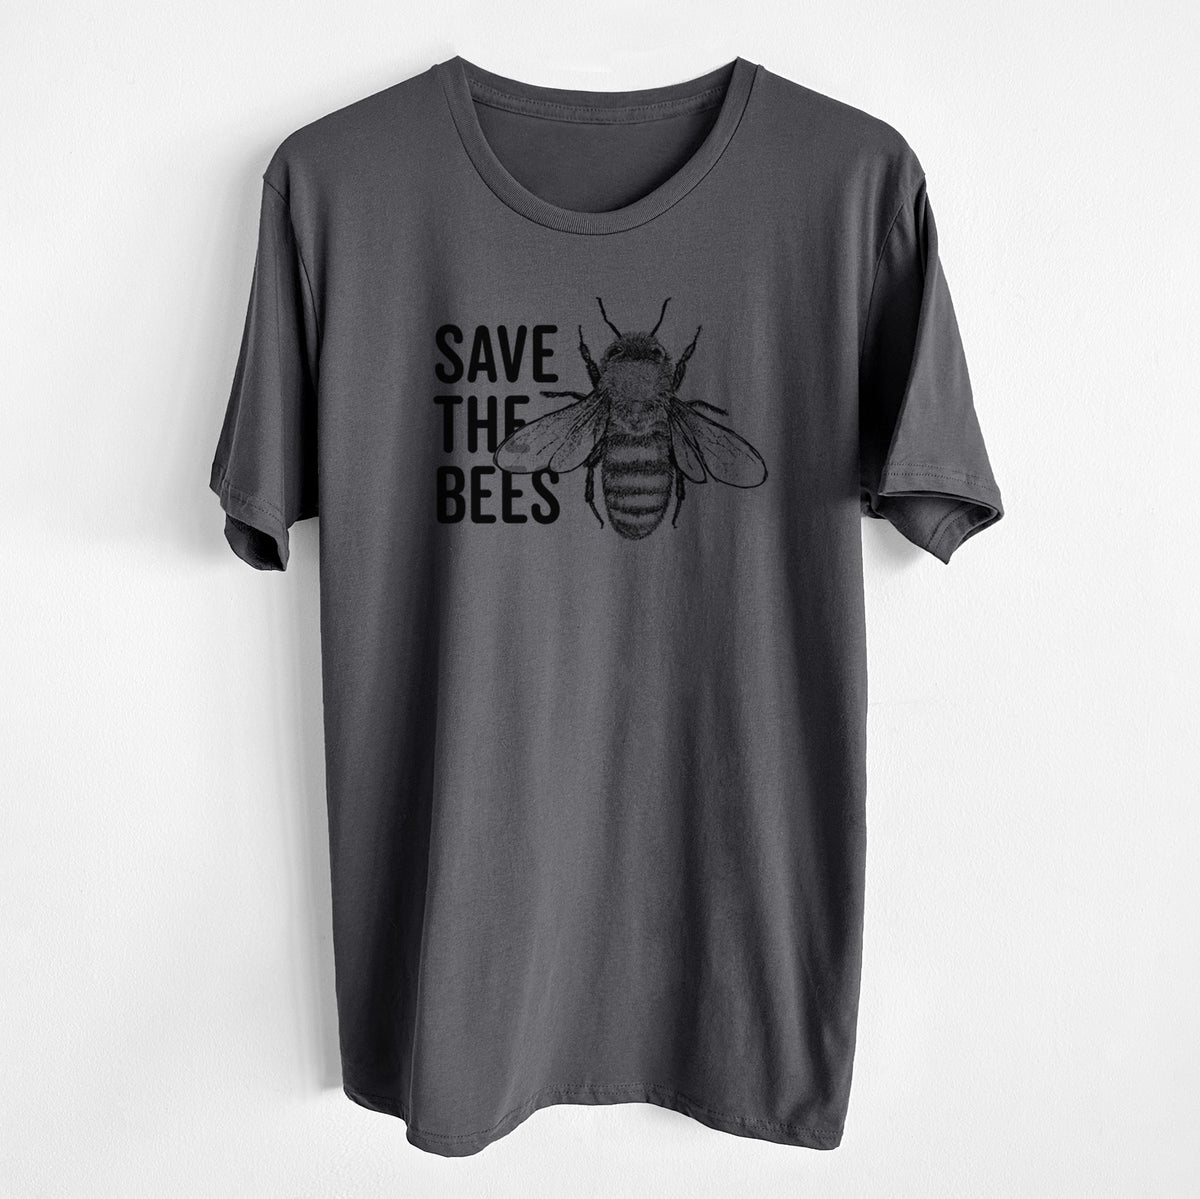 Save the Bees - Unisex Crewneck - Made in USA - 100% Organic Cotton